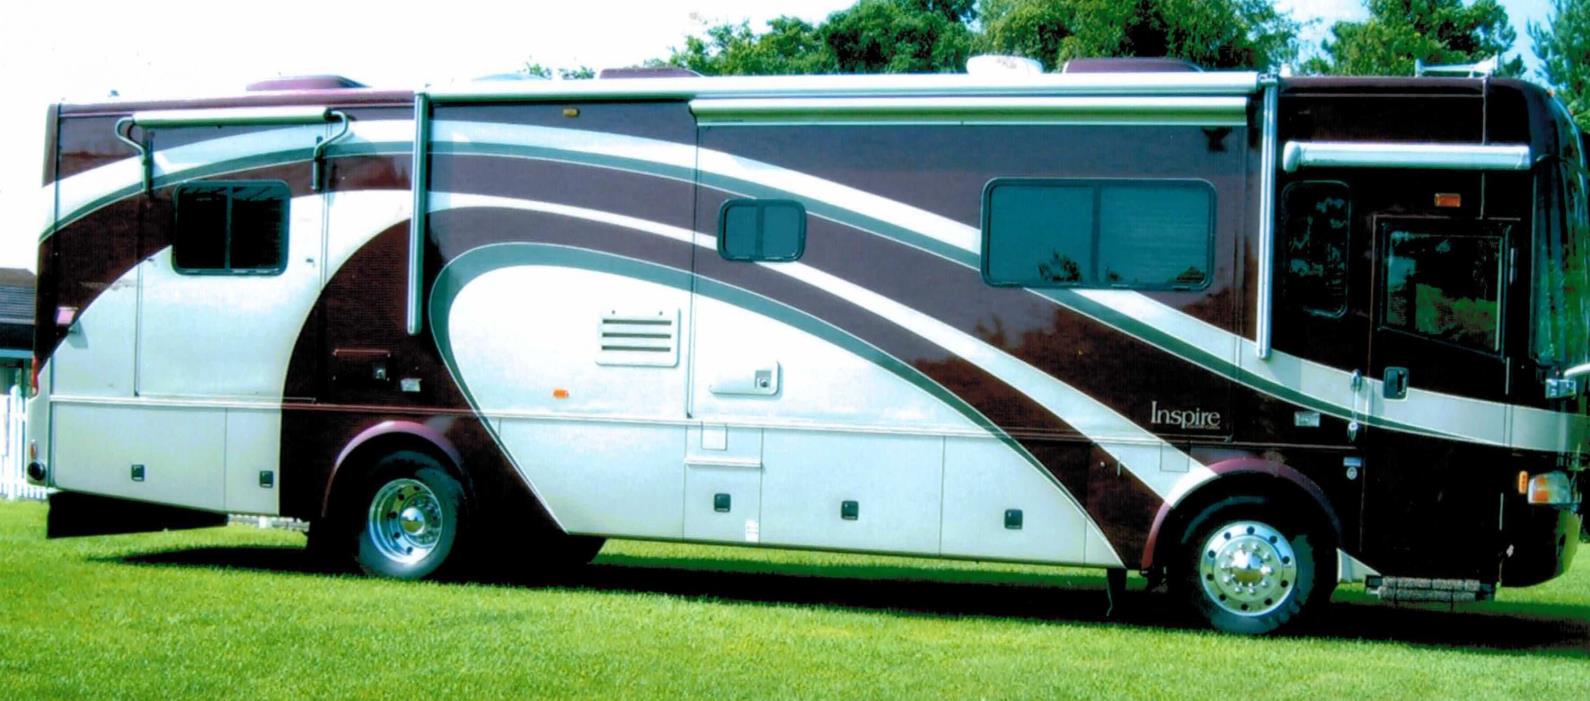 2004 Country Coach Inspire